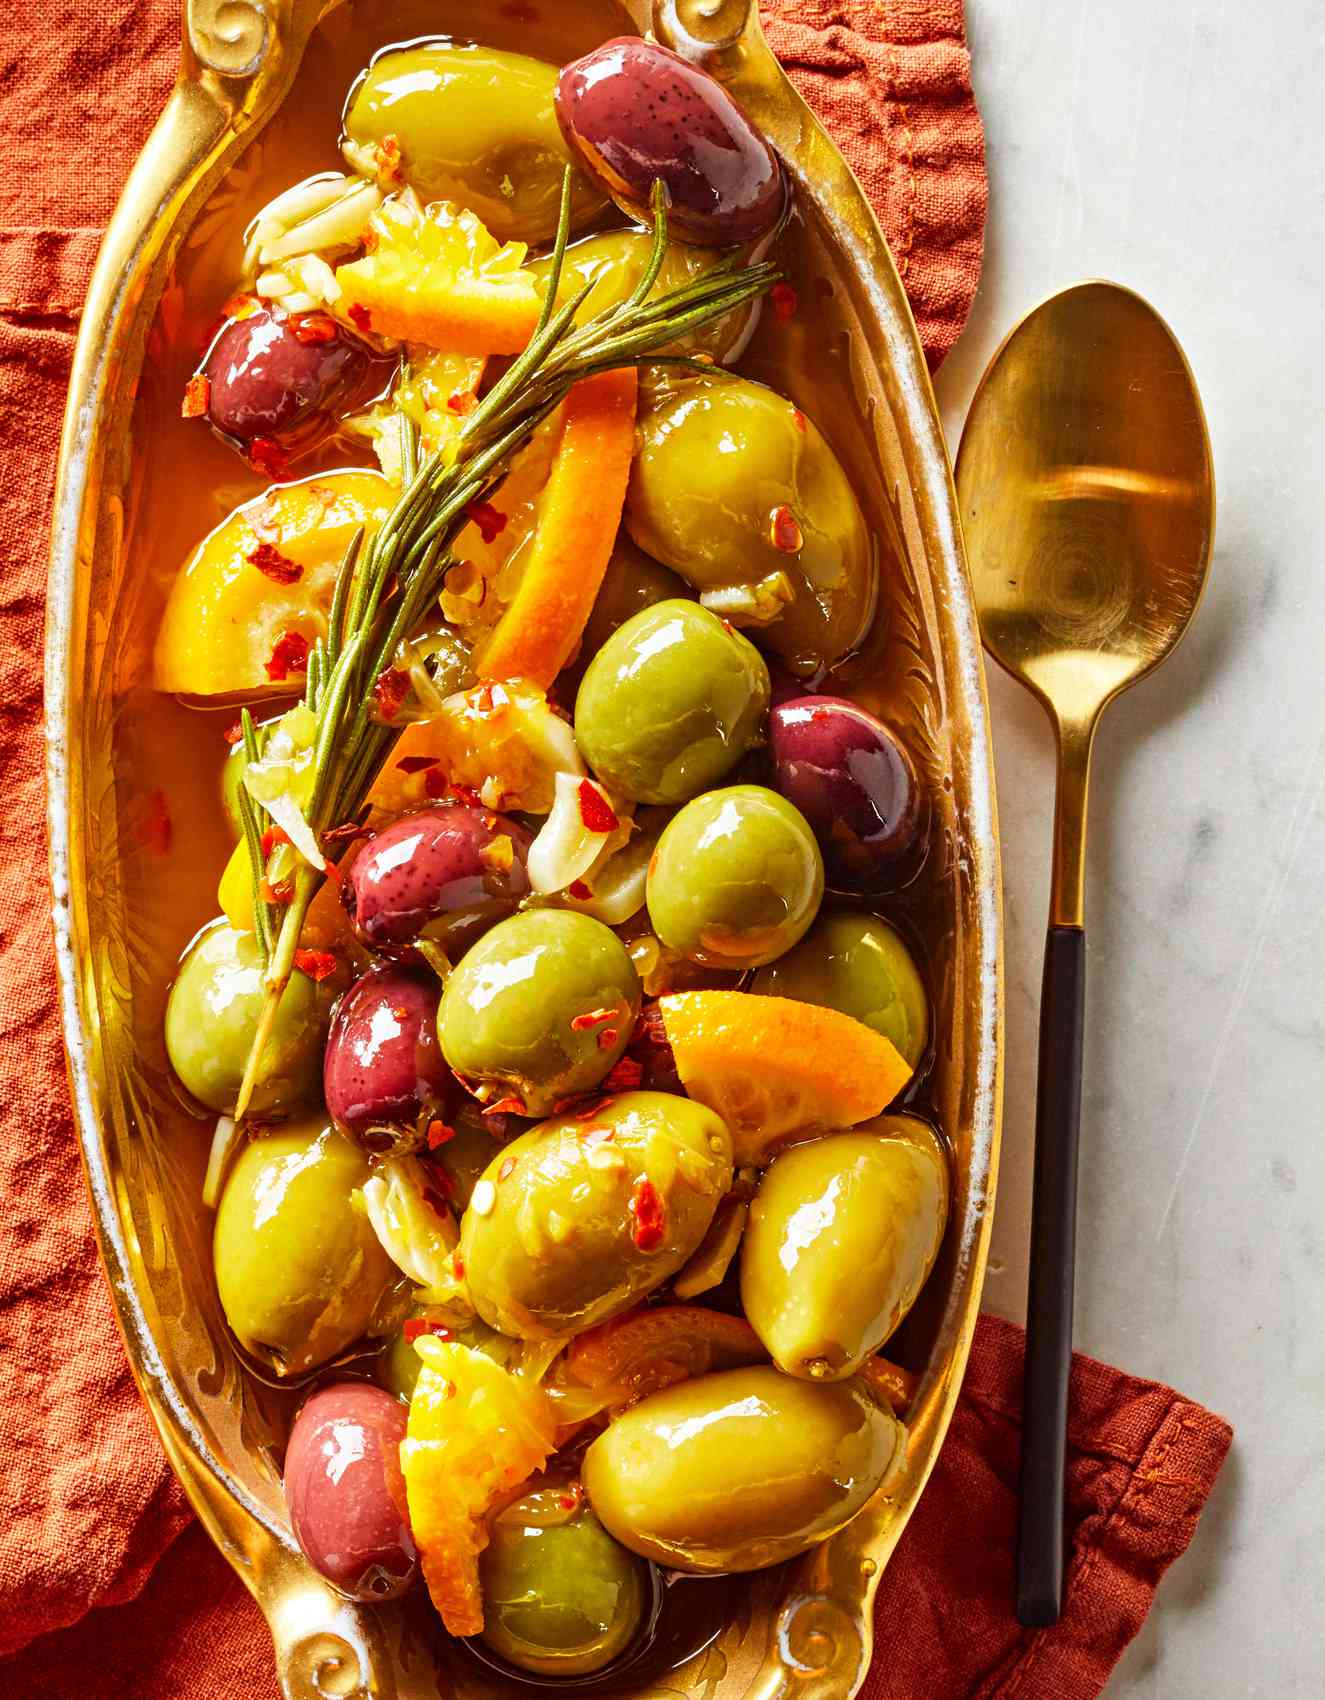 Marinated Olives and Clementines with Rosemary